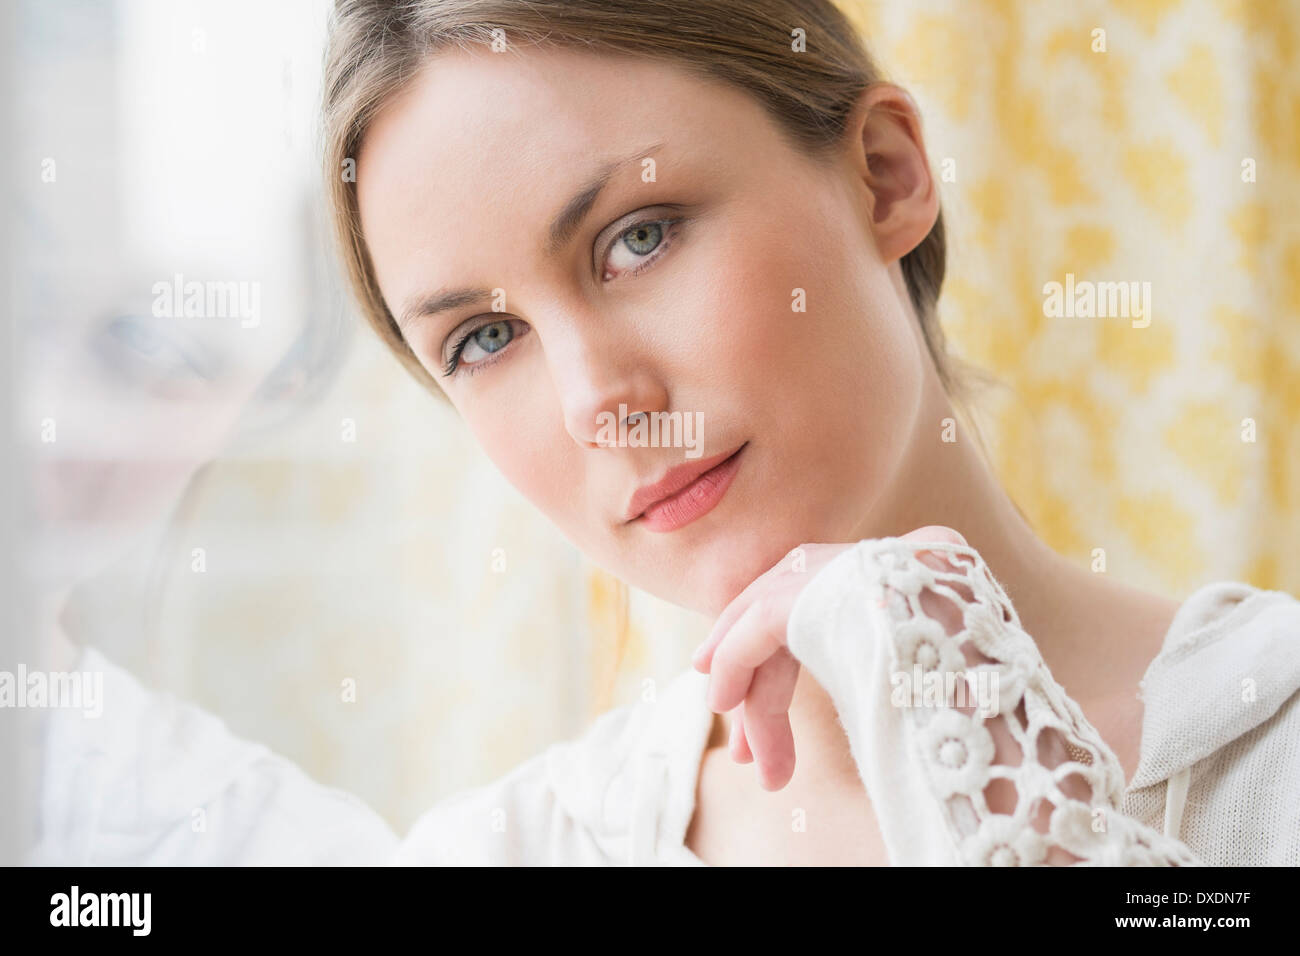 Portrait of young woman by window Stock Photo